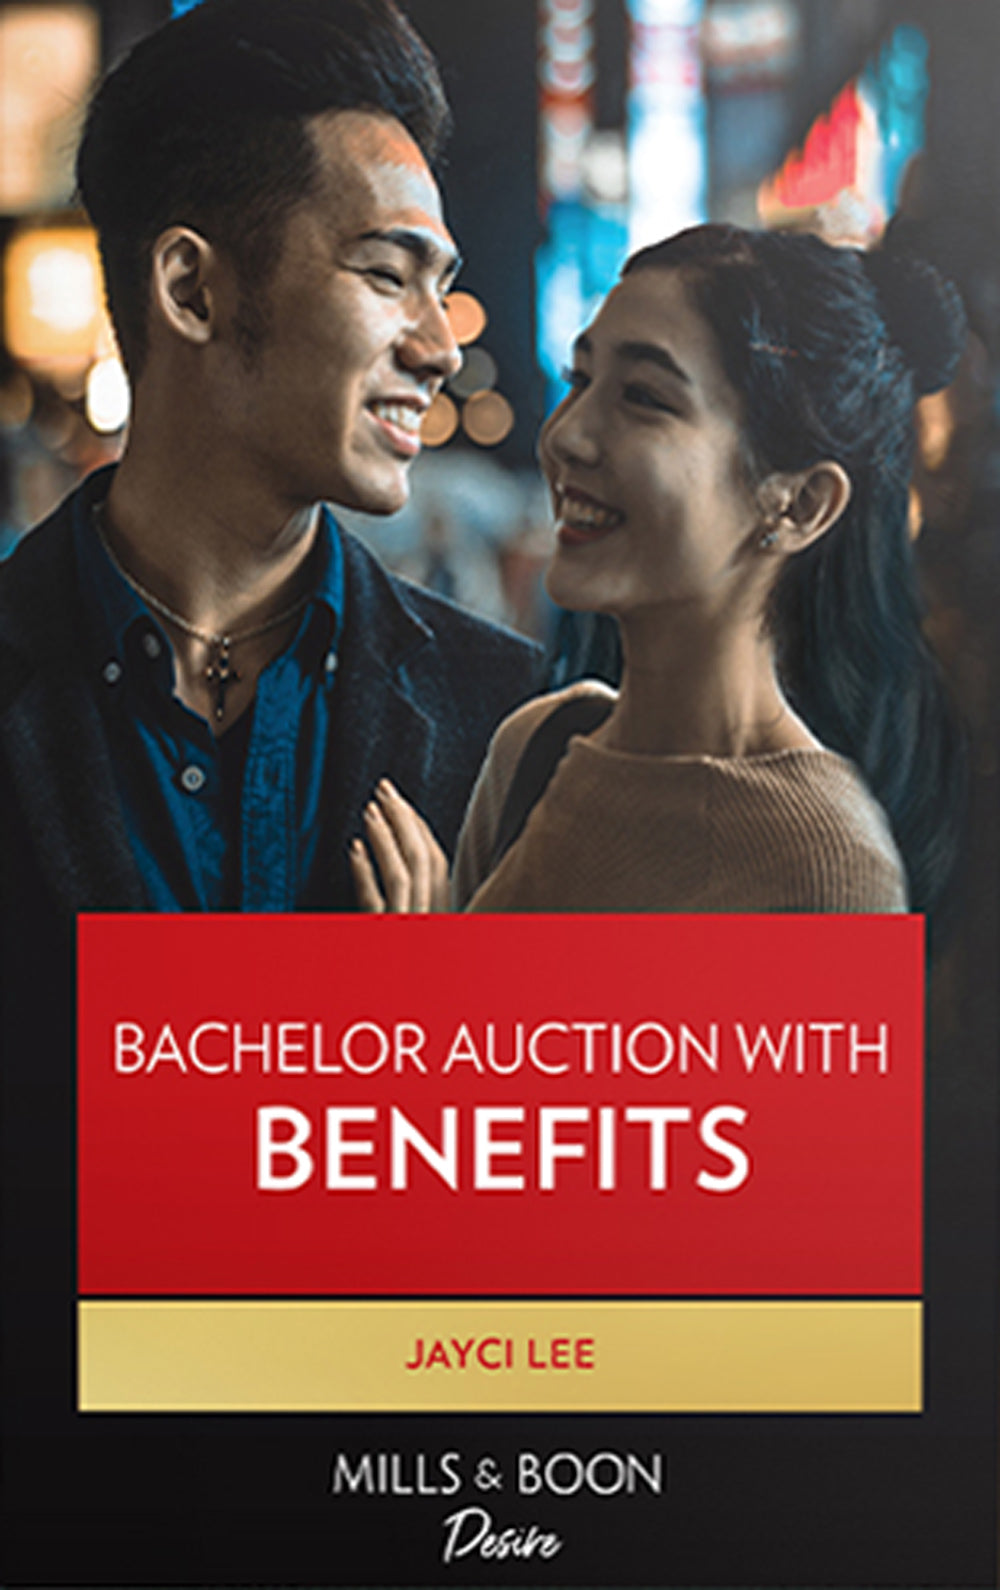 Bachelor Auction with Benefits - Chapter 7